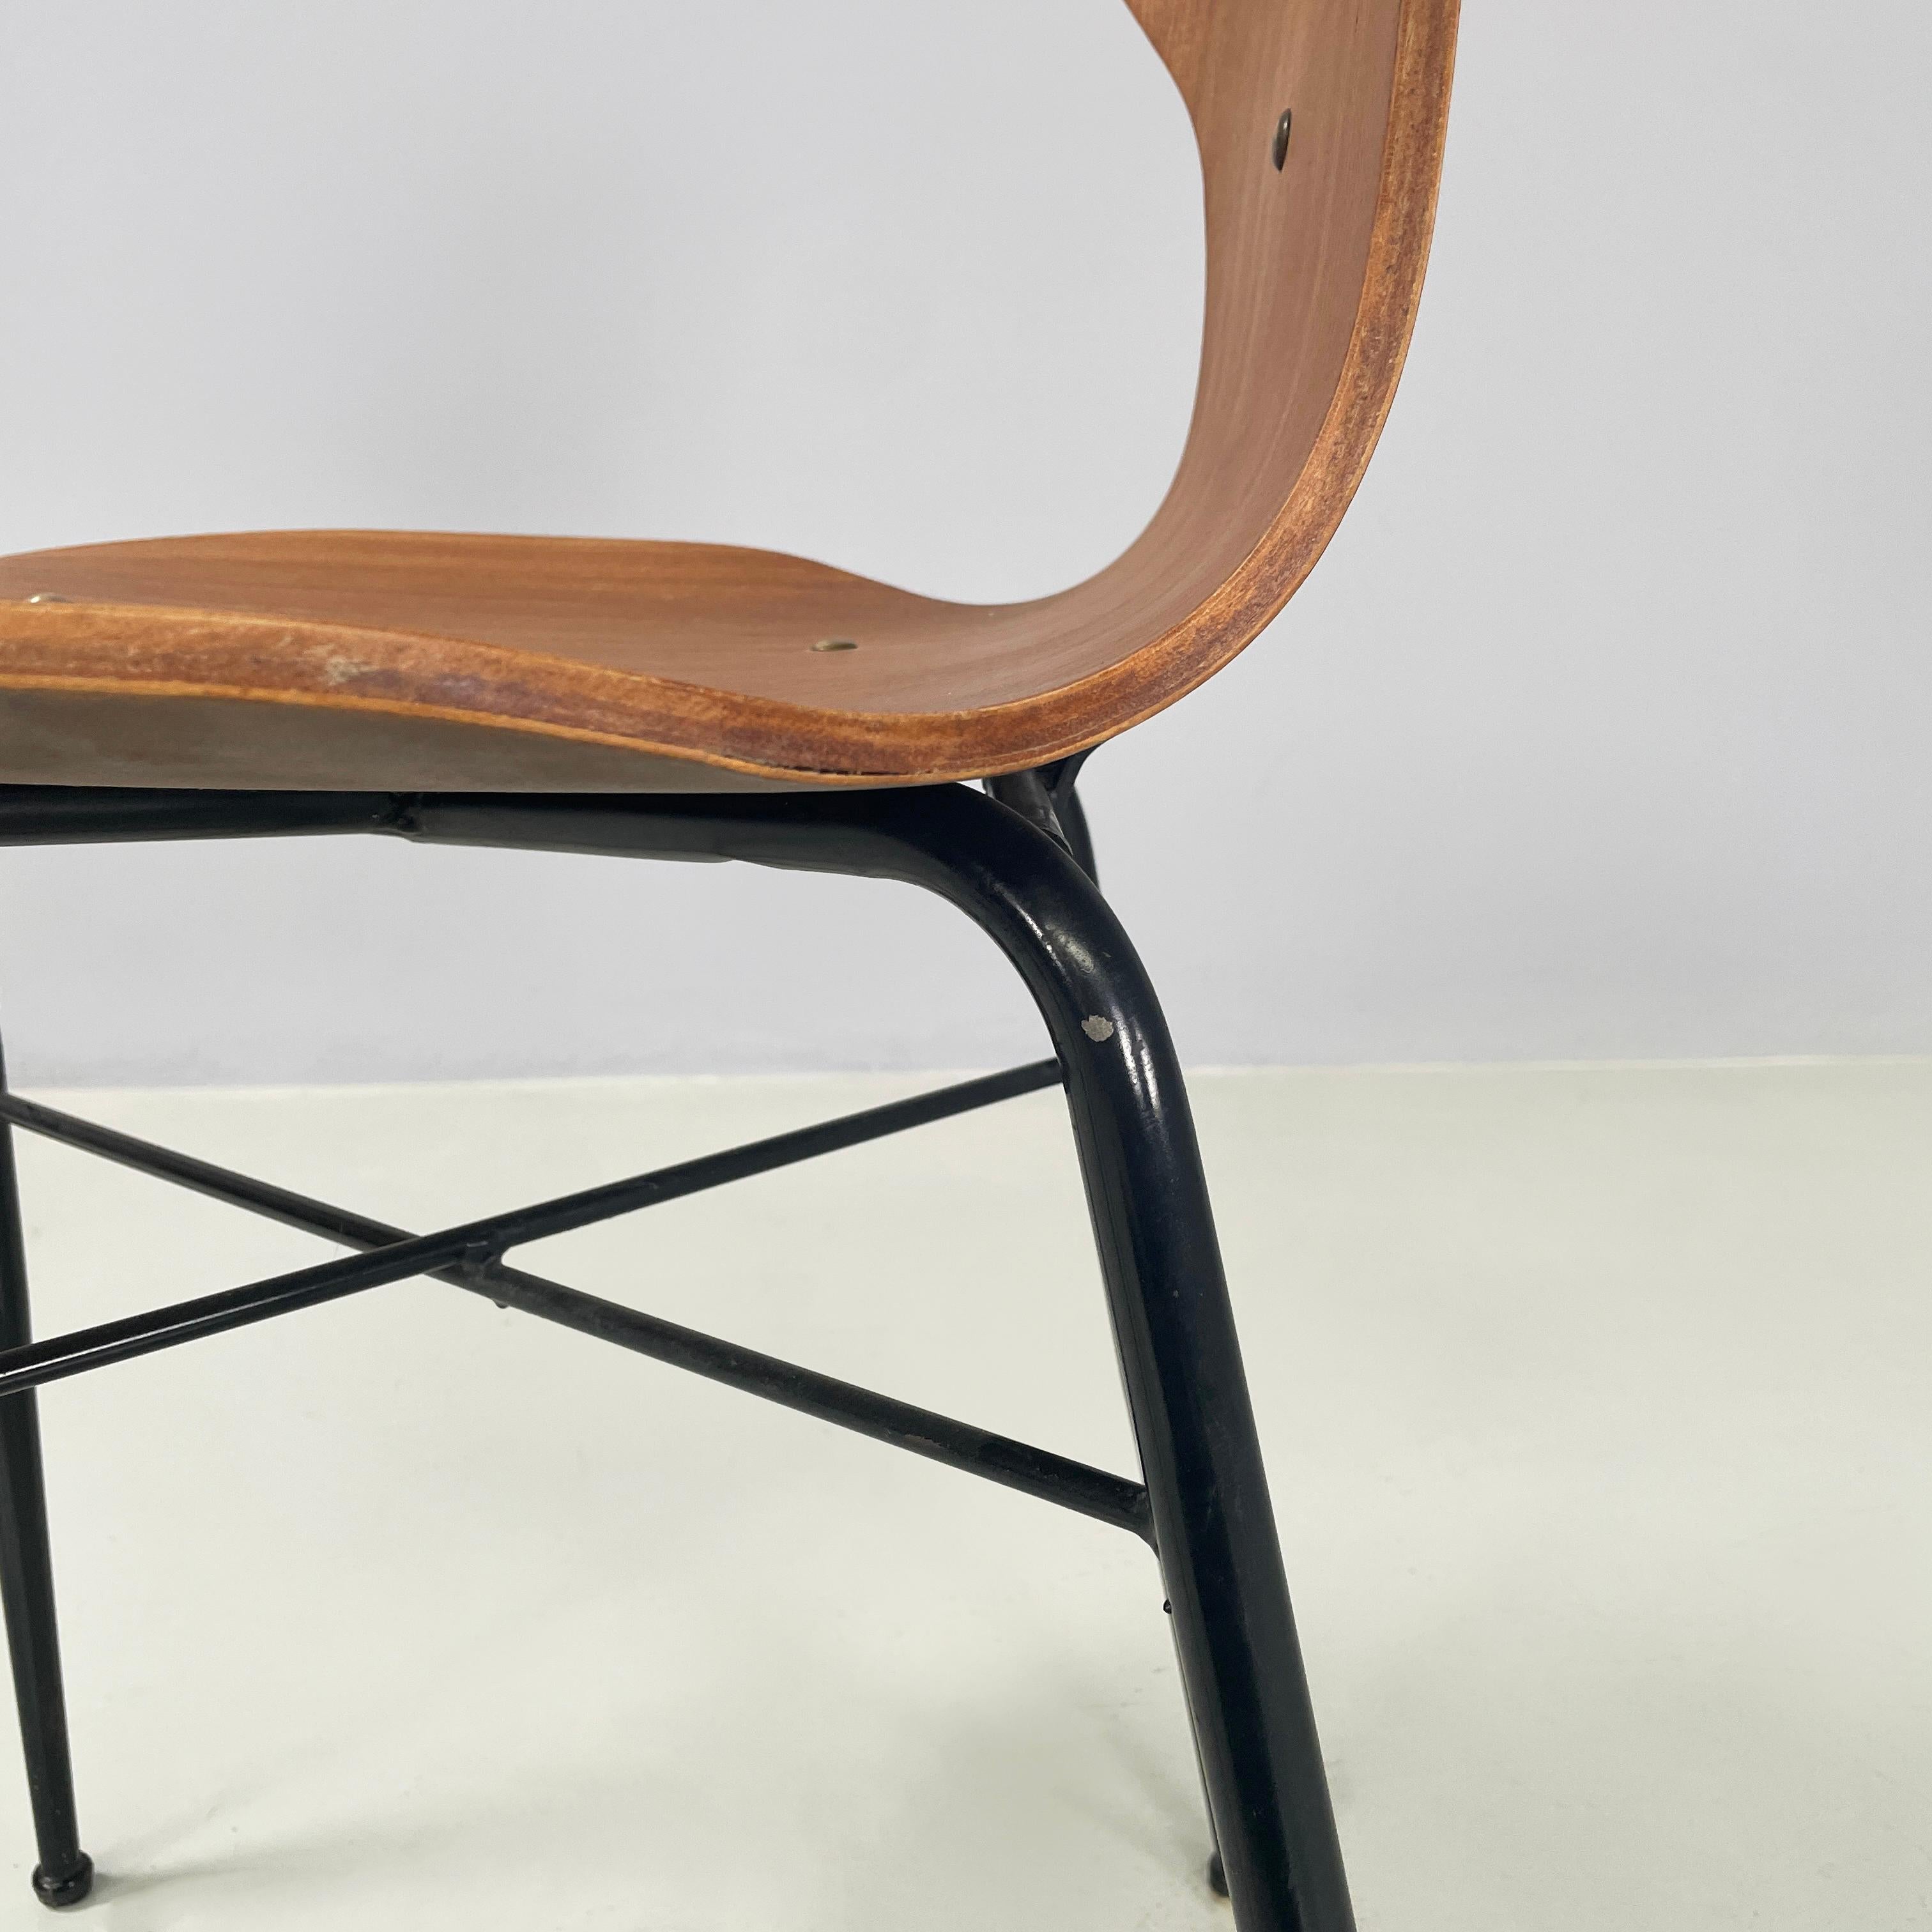 Italian mid-century modern Chair in curved wood and black metal, 1960s For Sale 8